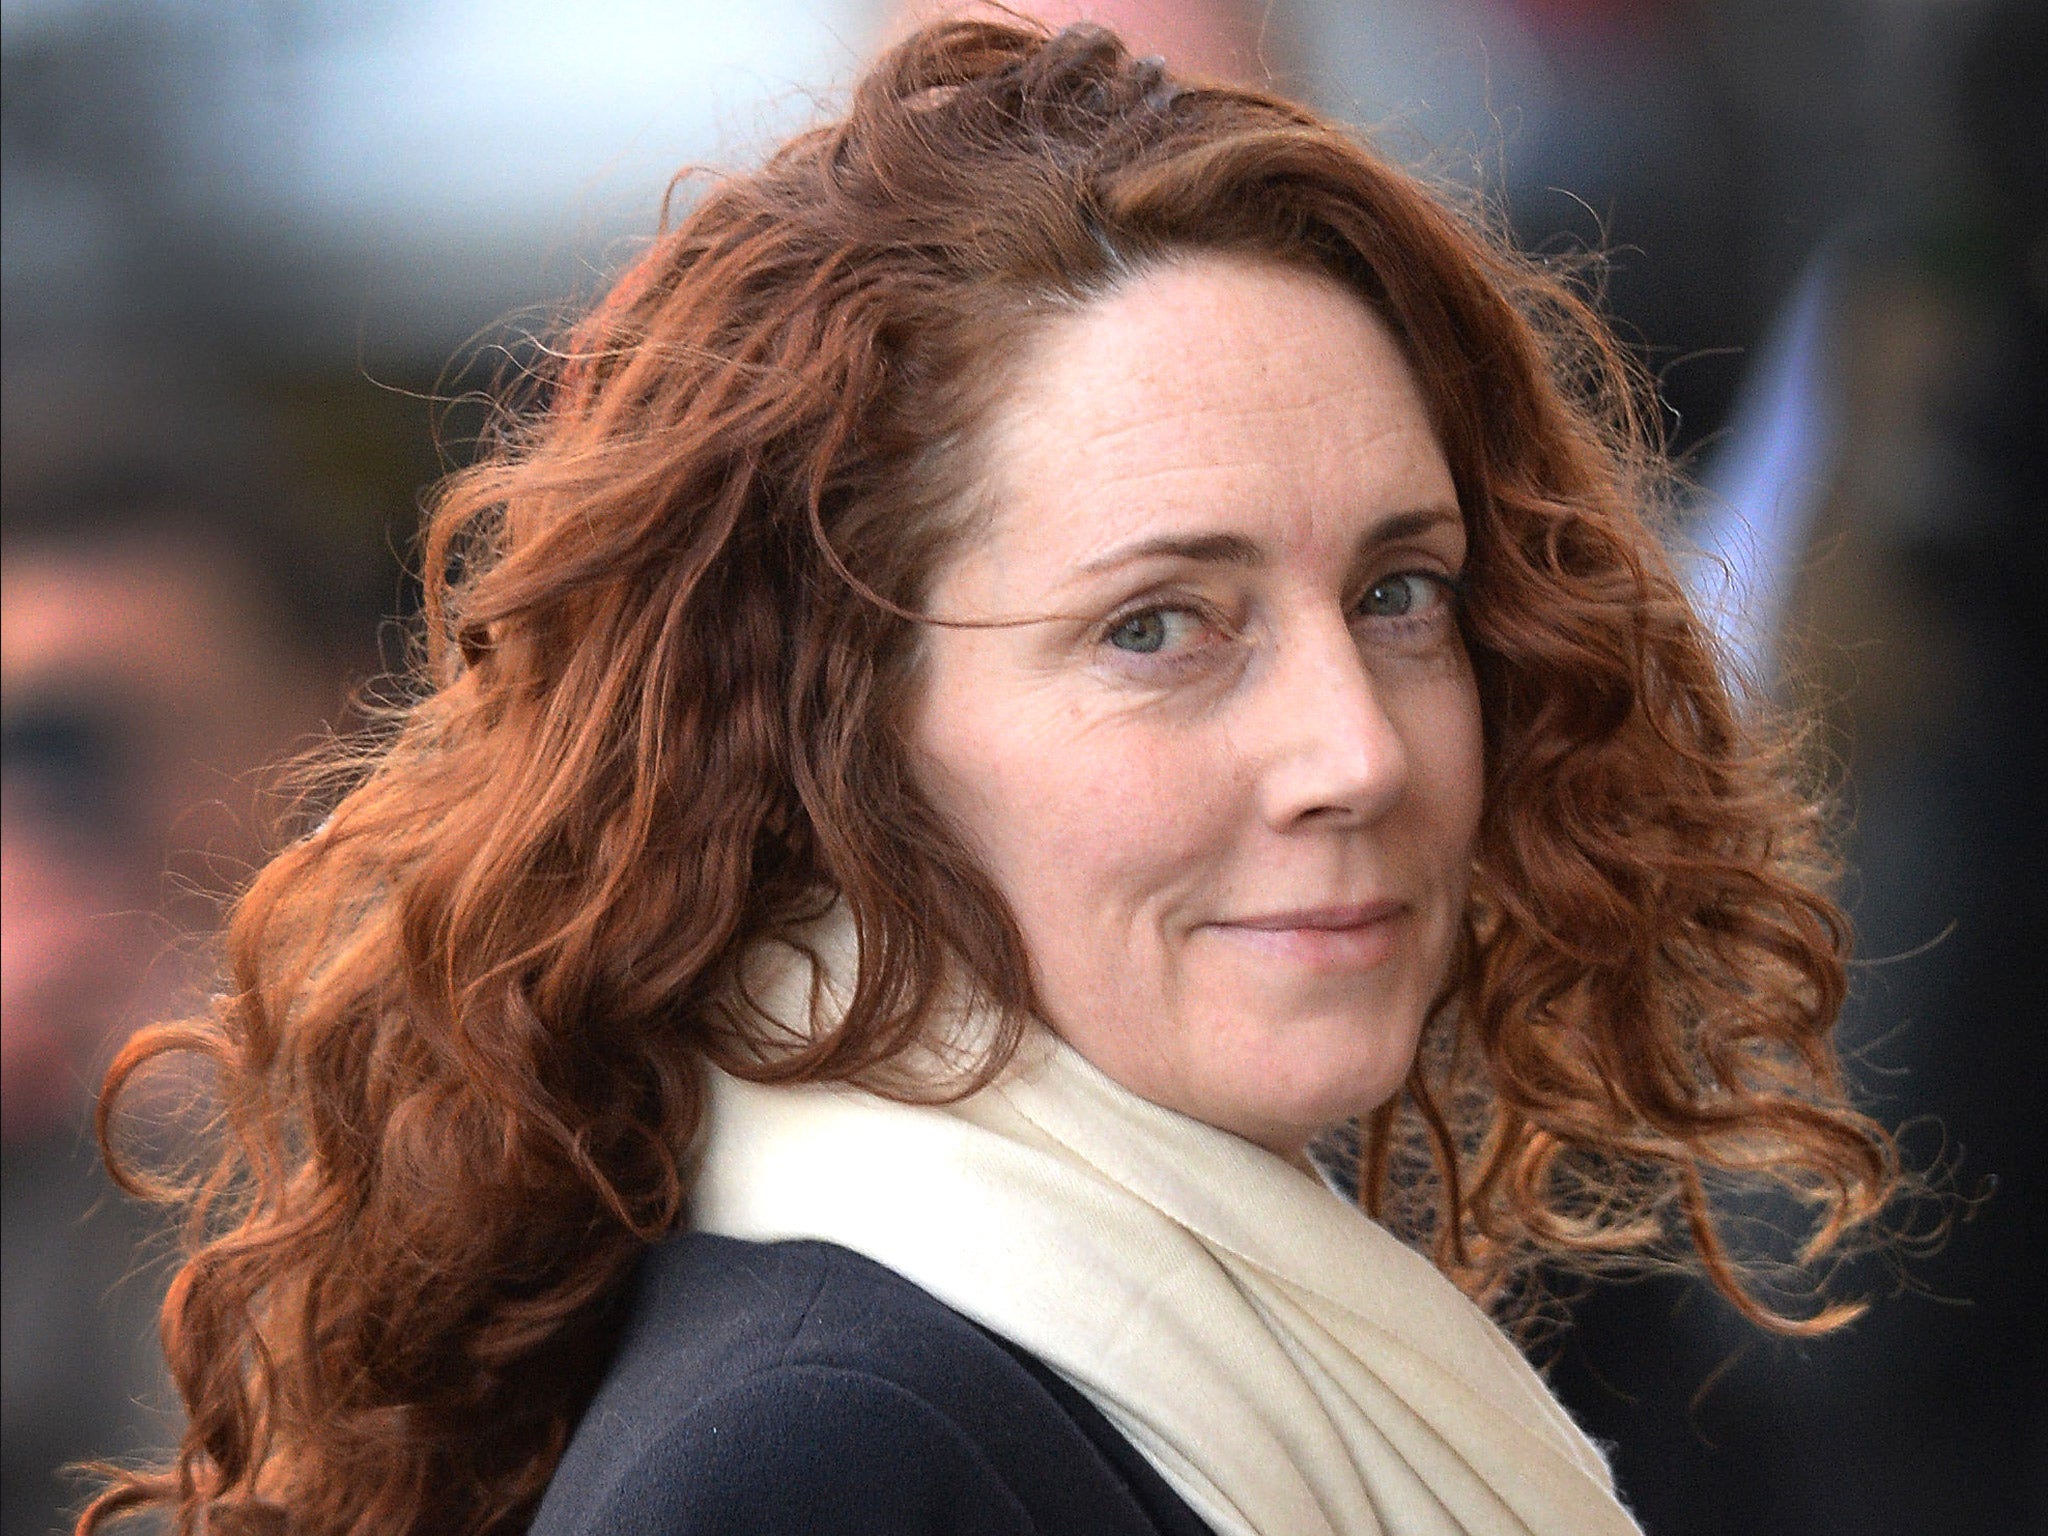 Former News International chief executive Rebekah Brooks arrives at the Old Bailey in London